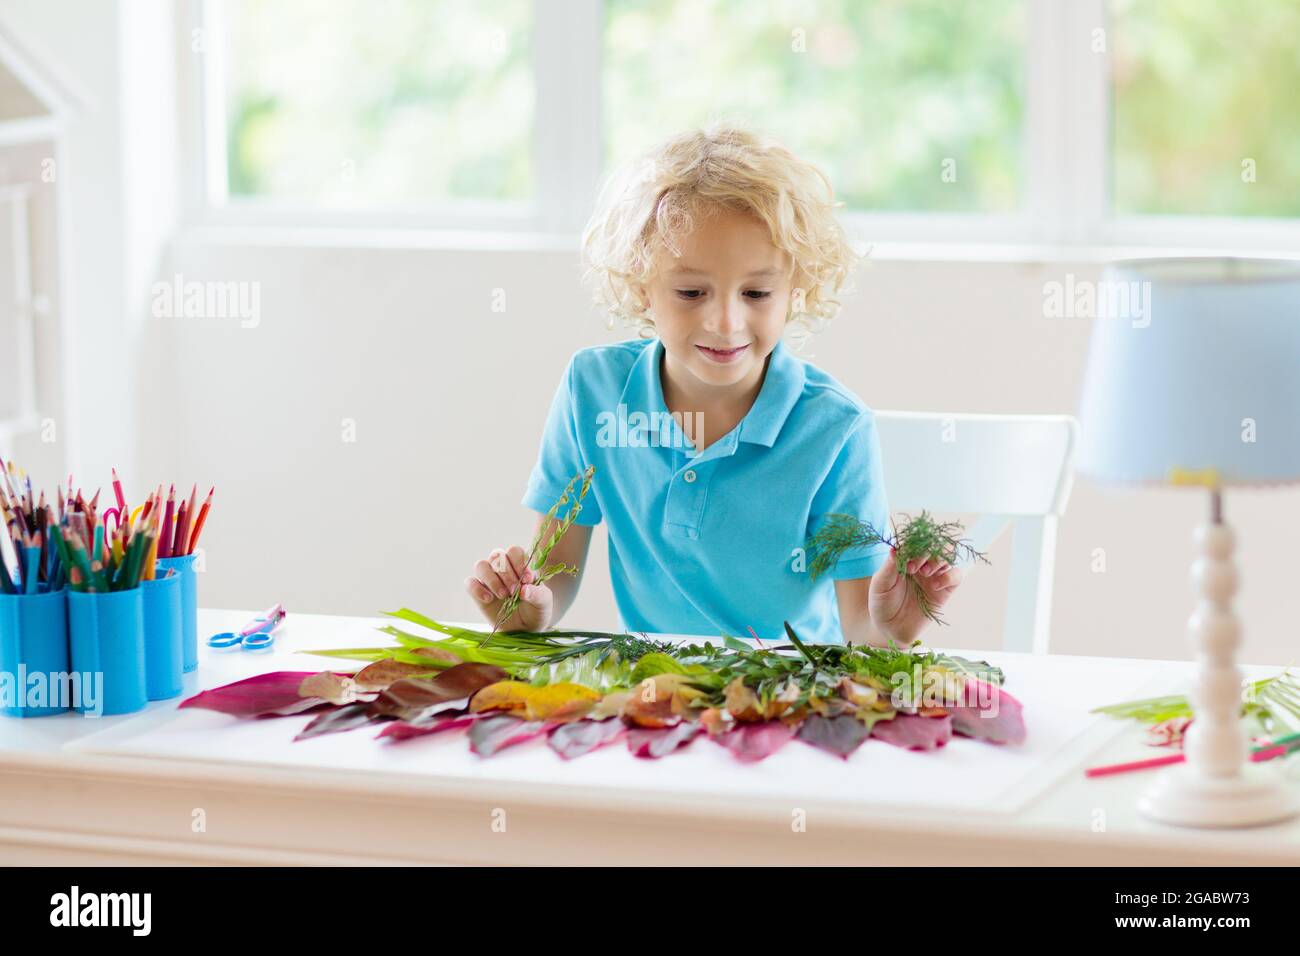 Child creating picture with colorful leaves. Art and crafts for kids. Little boy making collage image with rainbow plant leaf. Biology homework Stock Photo